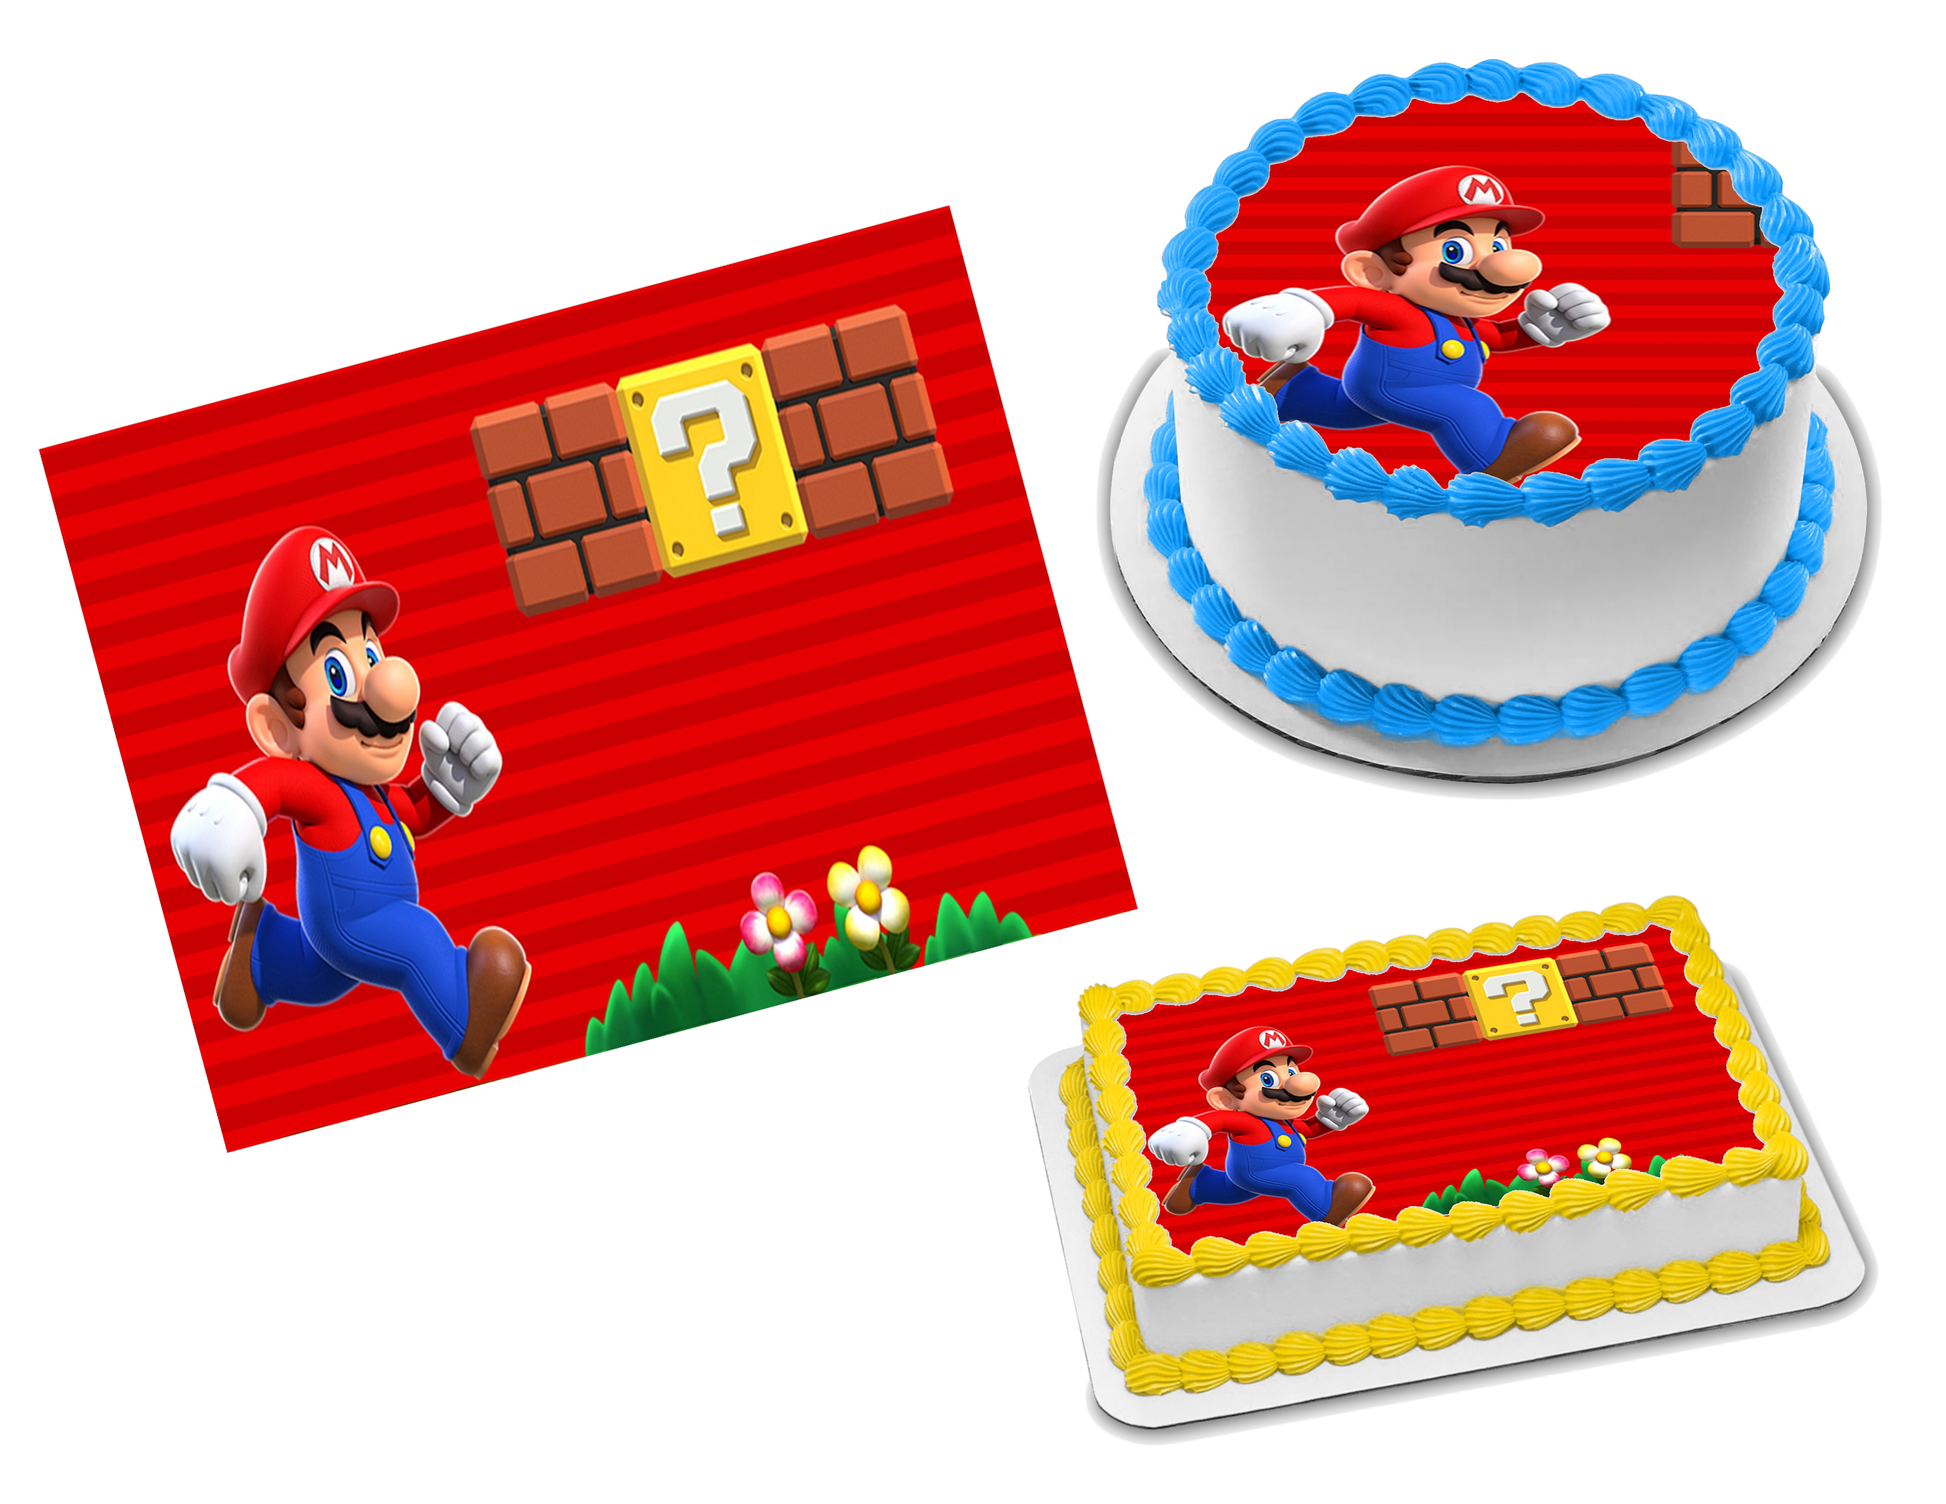 Oreo Drops Limited-Edition Super Mario Cookies with Different